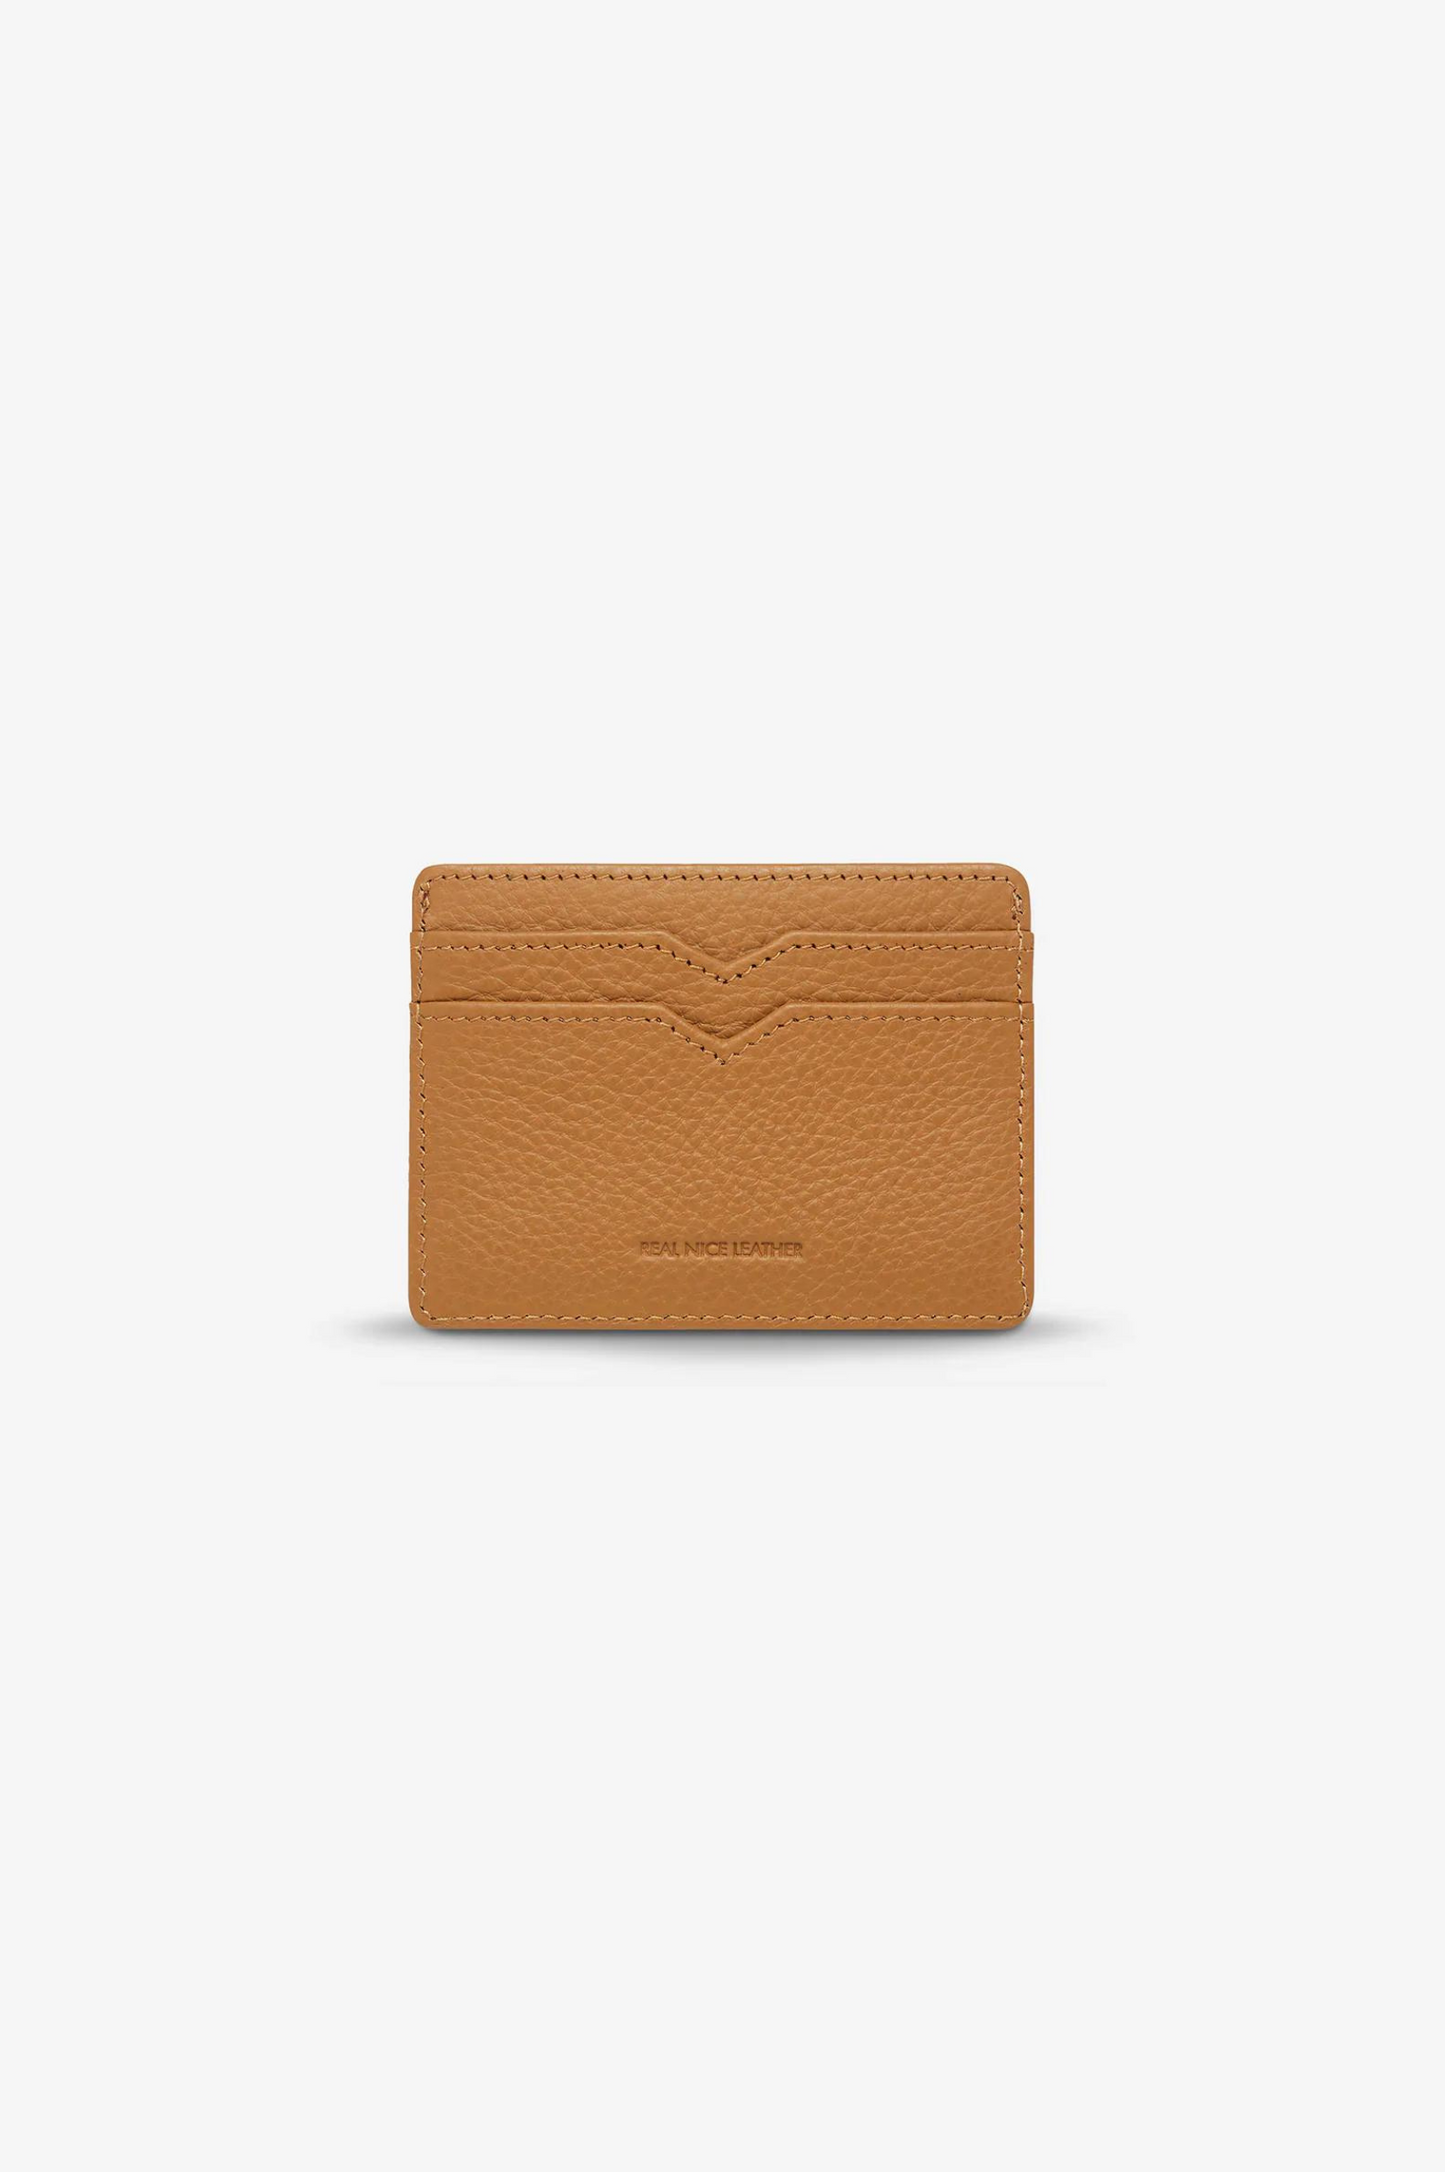 TOGETHER FOR NOW WALLET (Tan)